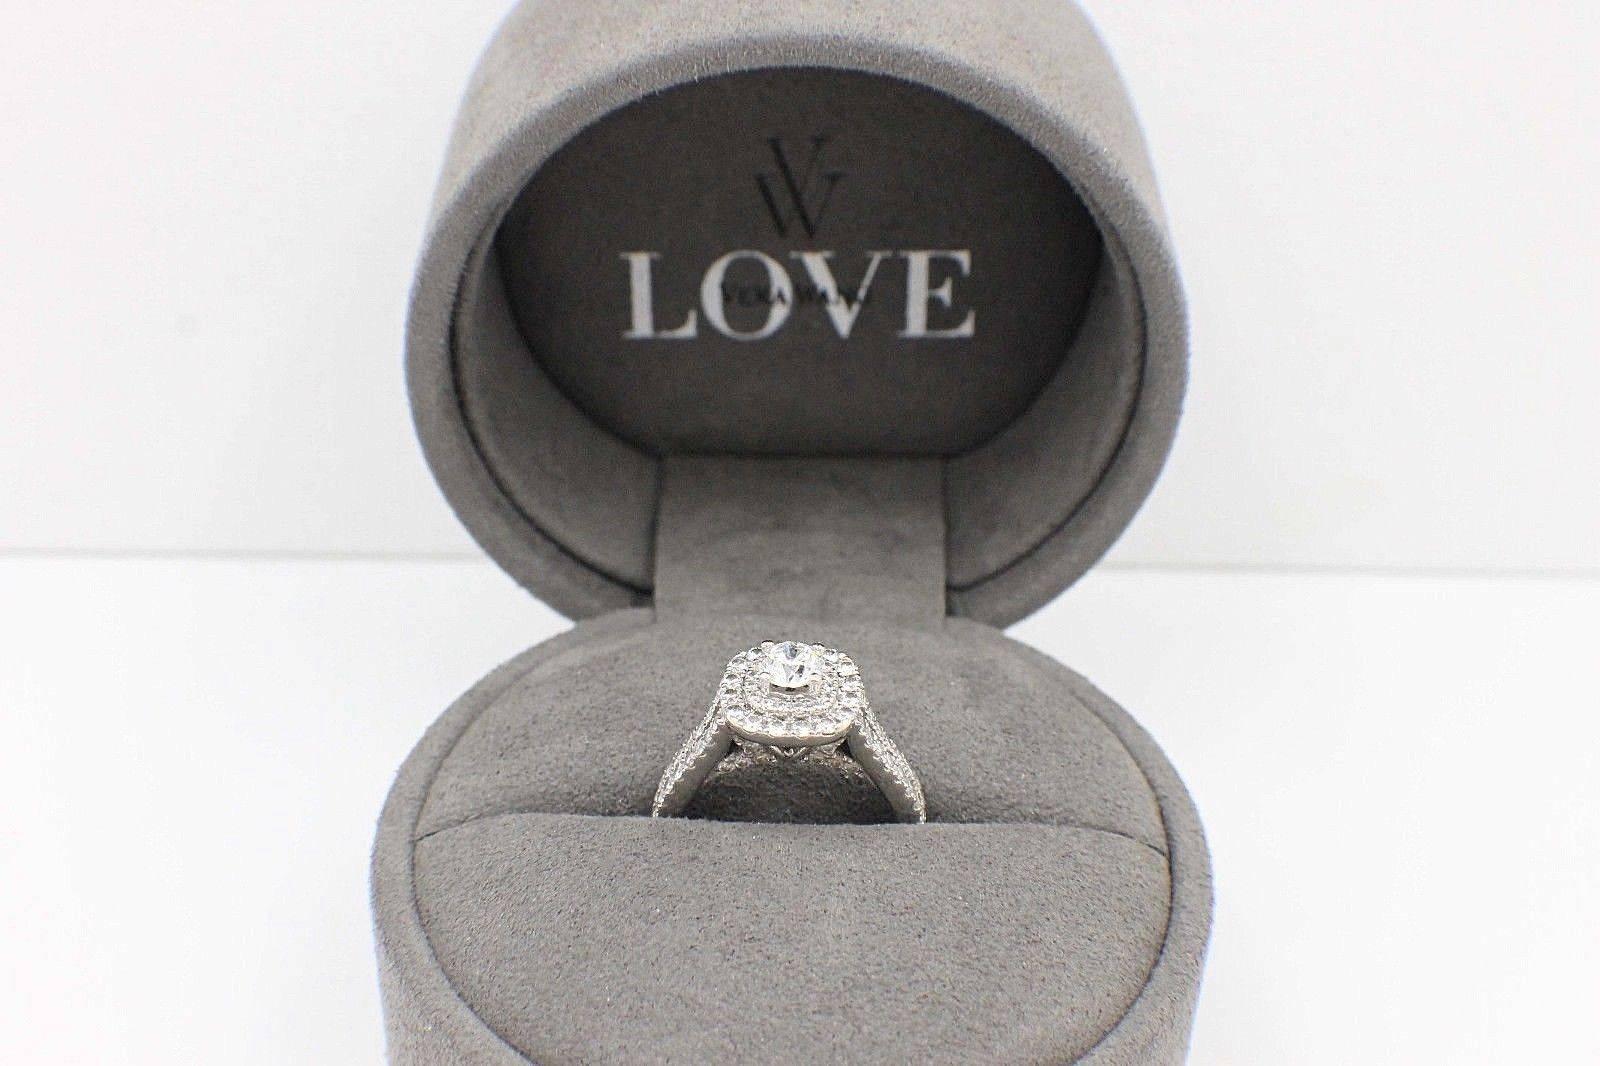 VERA WANG BRIDAL LOVE COLLECTION
Style:  Split Shank Halo Diamond Engagement Ring 1 1/2 TCW
Sku Number:  #081056208
Metal:  14KT White Gold
Size:  4.5 - sizable 
Total Carat Weight:  1 1/2 TCW
Center Diamond Shape:  Round Brilliant Diamond 0.50 CTS 